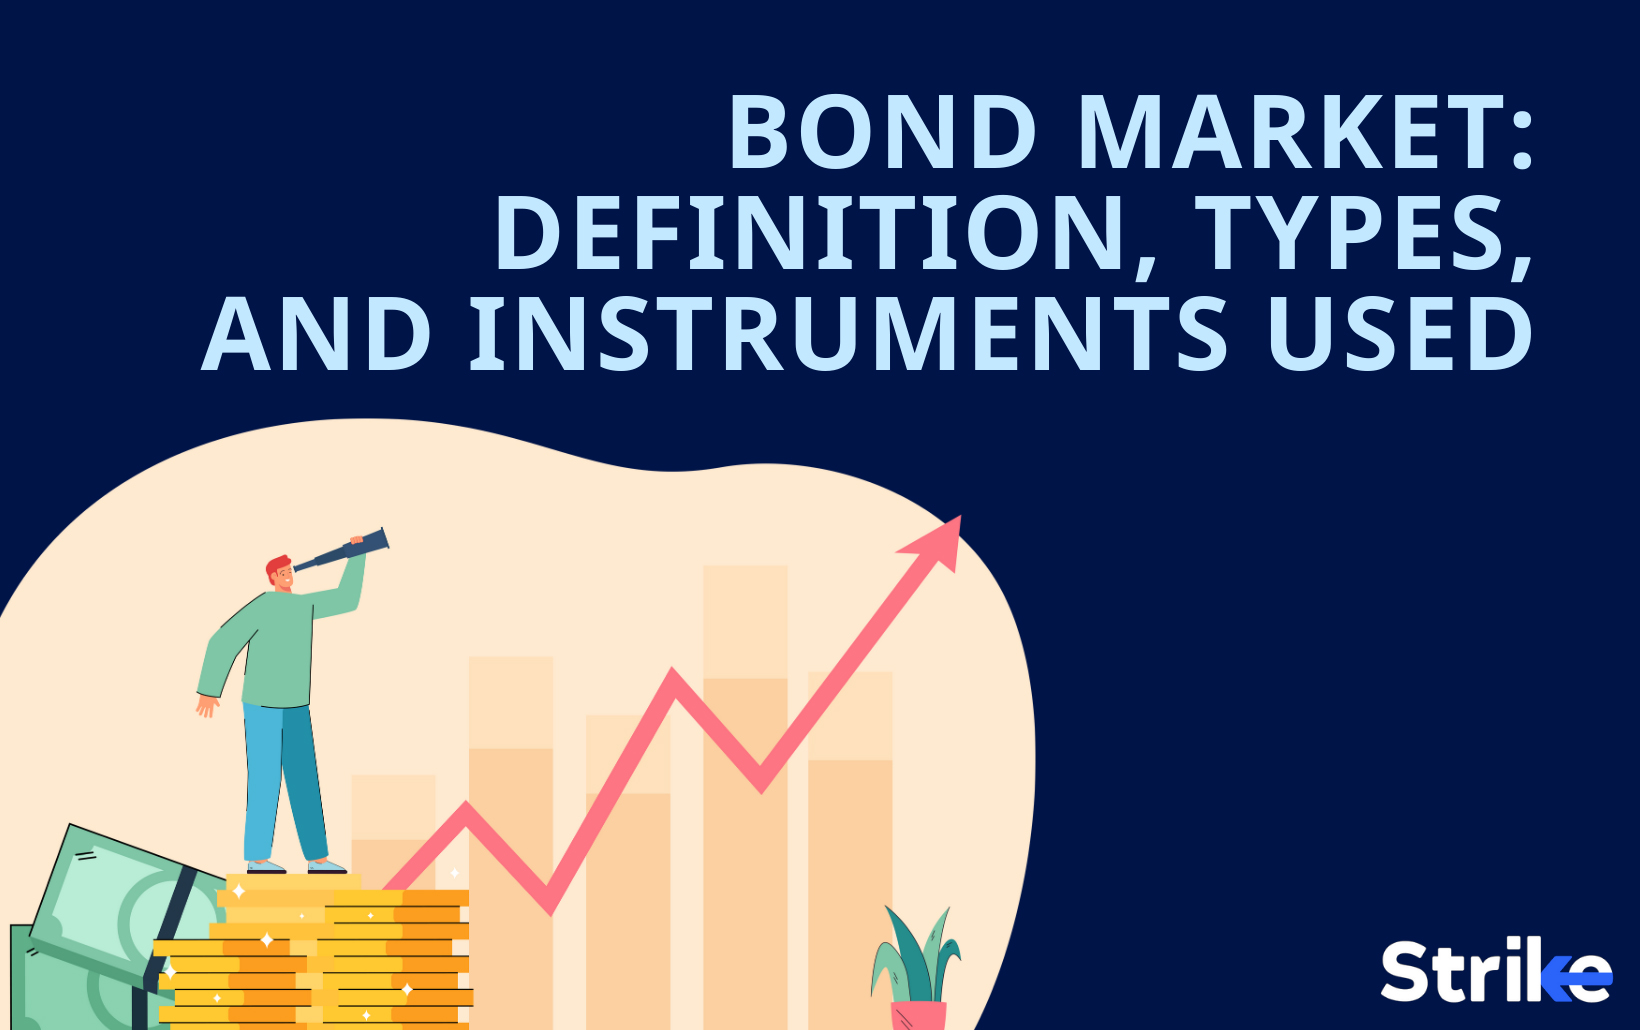 Bond Market: Definition, Types, and Instruments Used